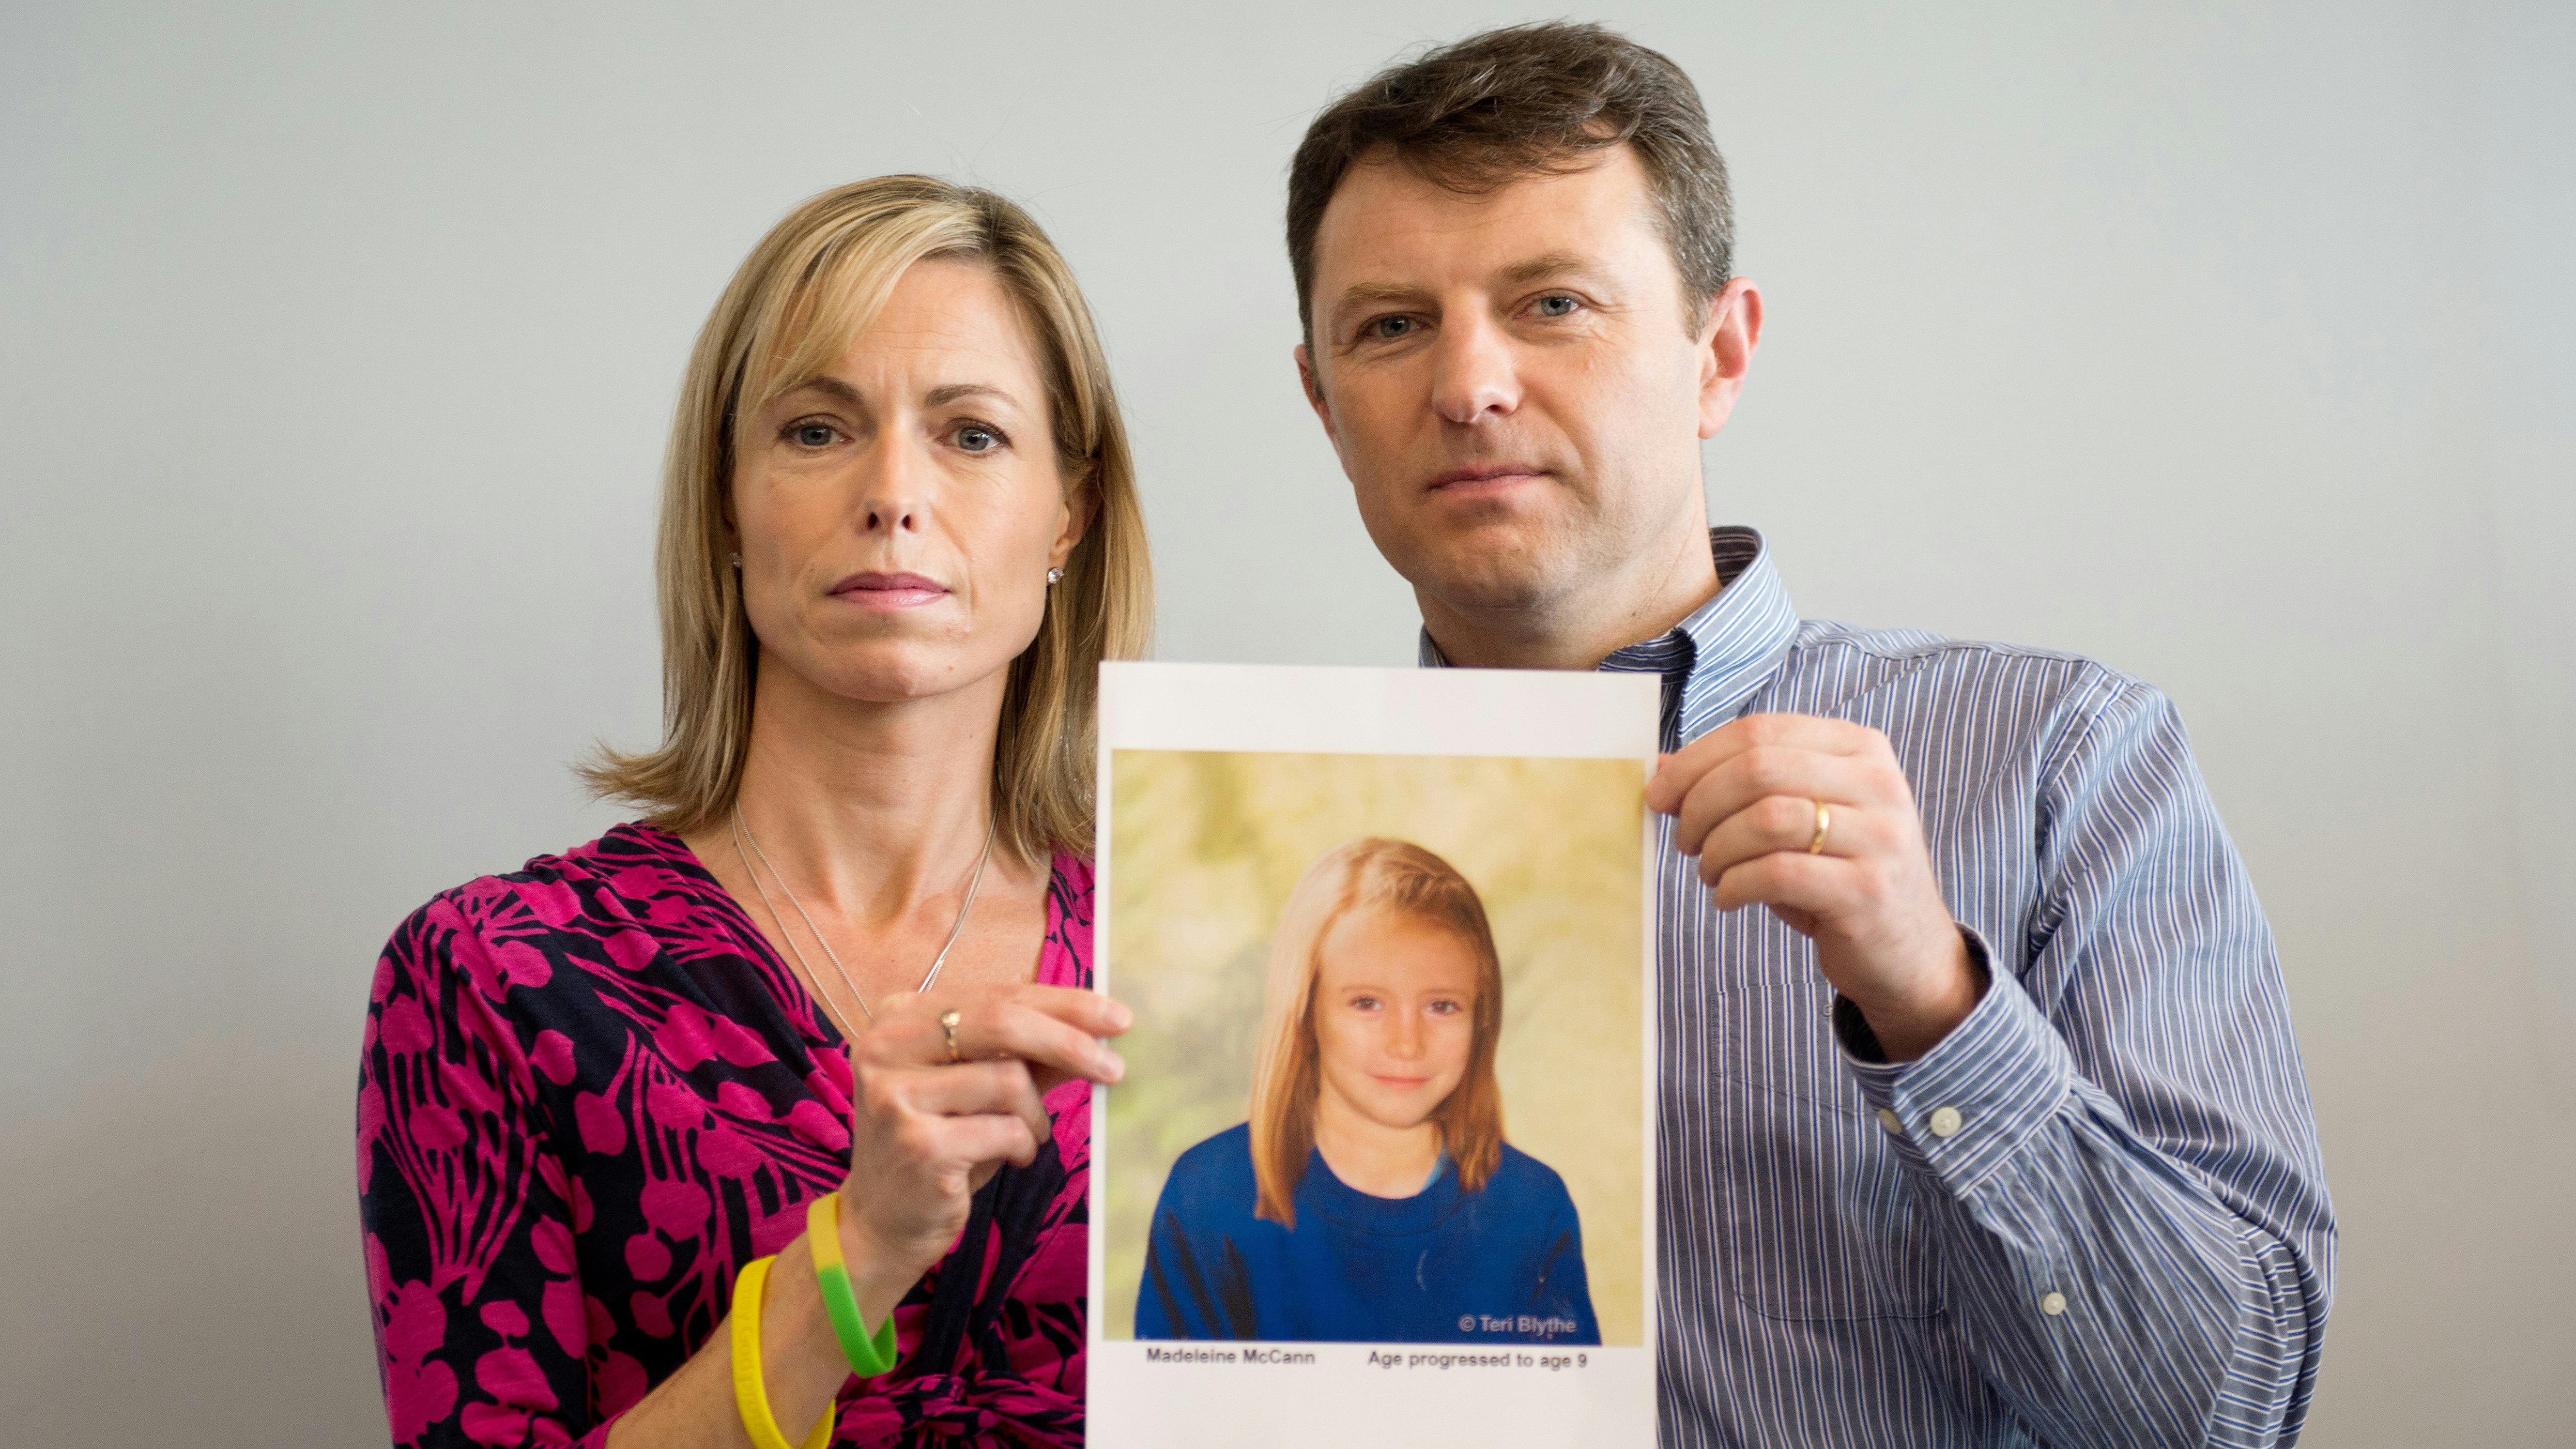 The Disappearance of Madeleine McCann Netflix documentary Real Life Closer pic